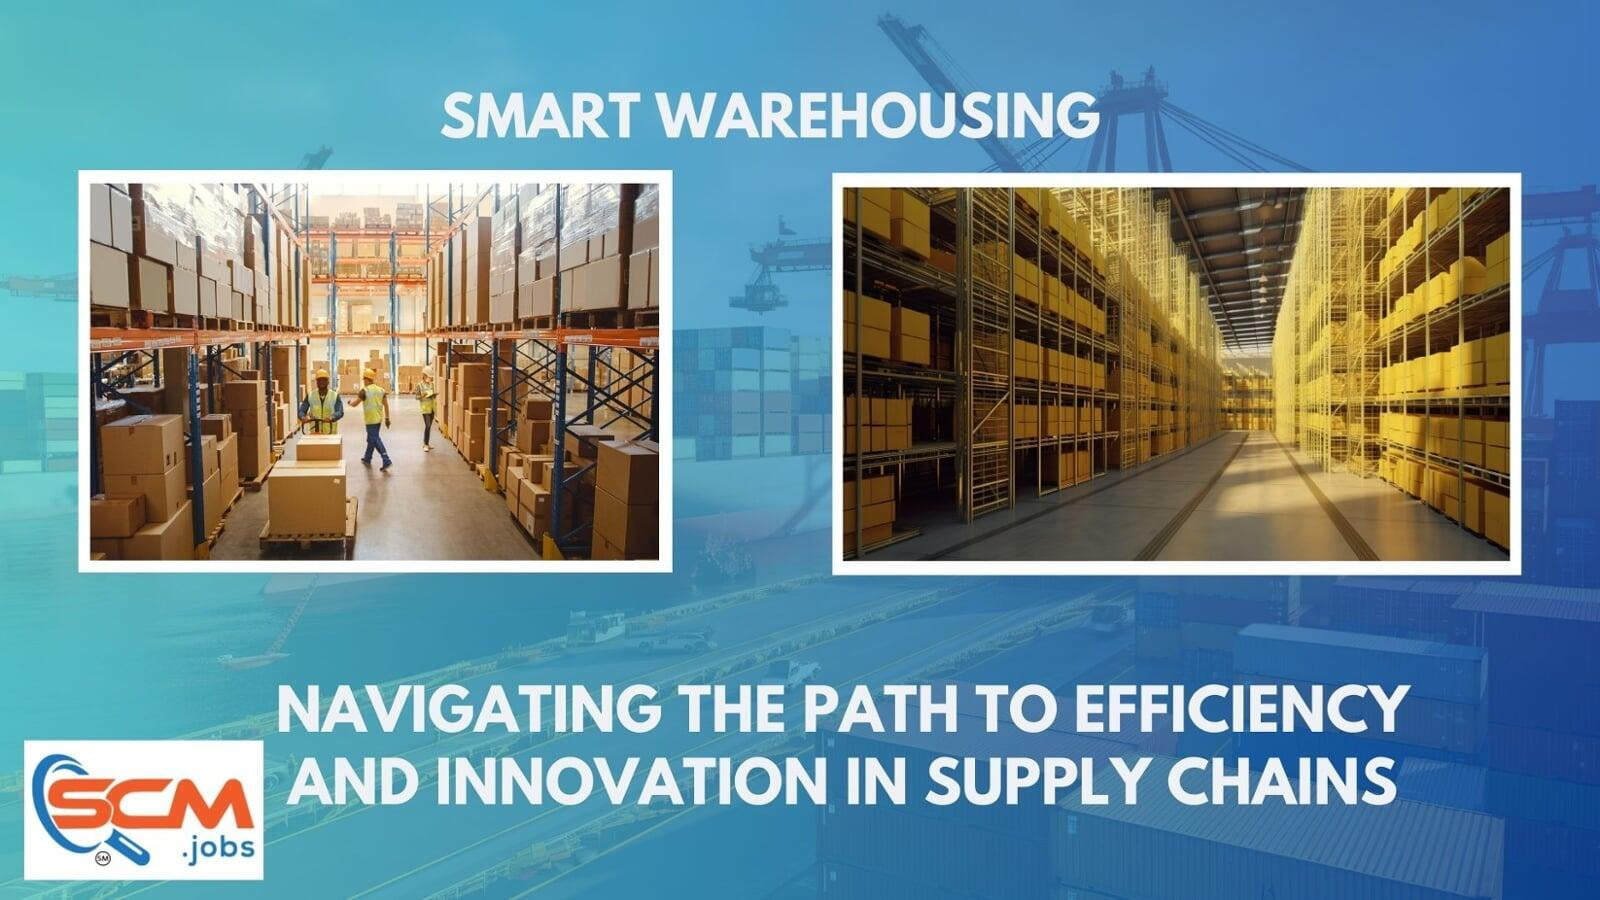 Smart Warehousing: Navigating the Path to Efficiency and Innovation in Supply Chains